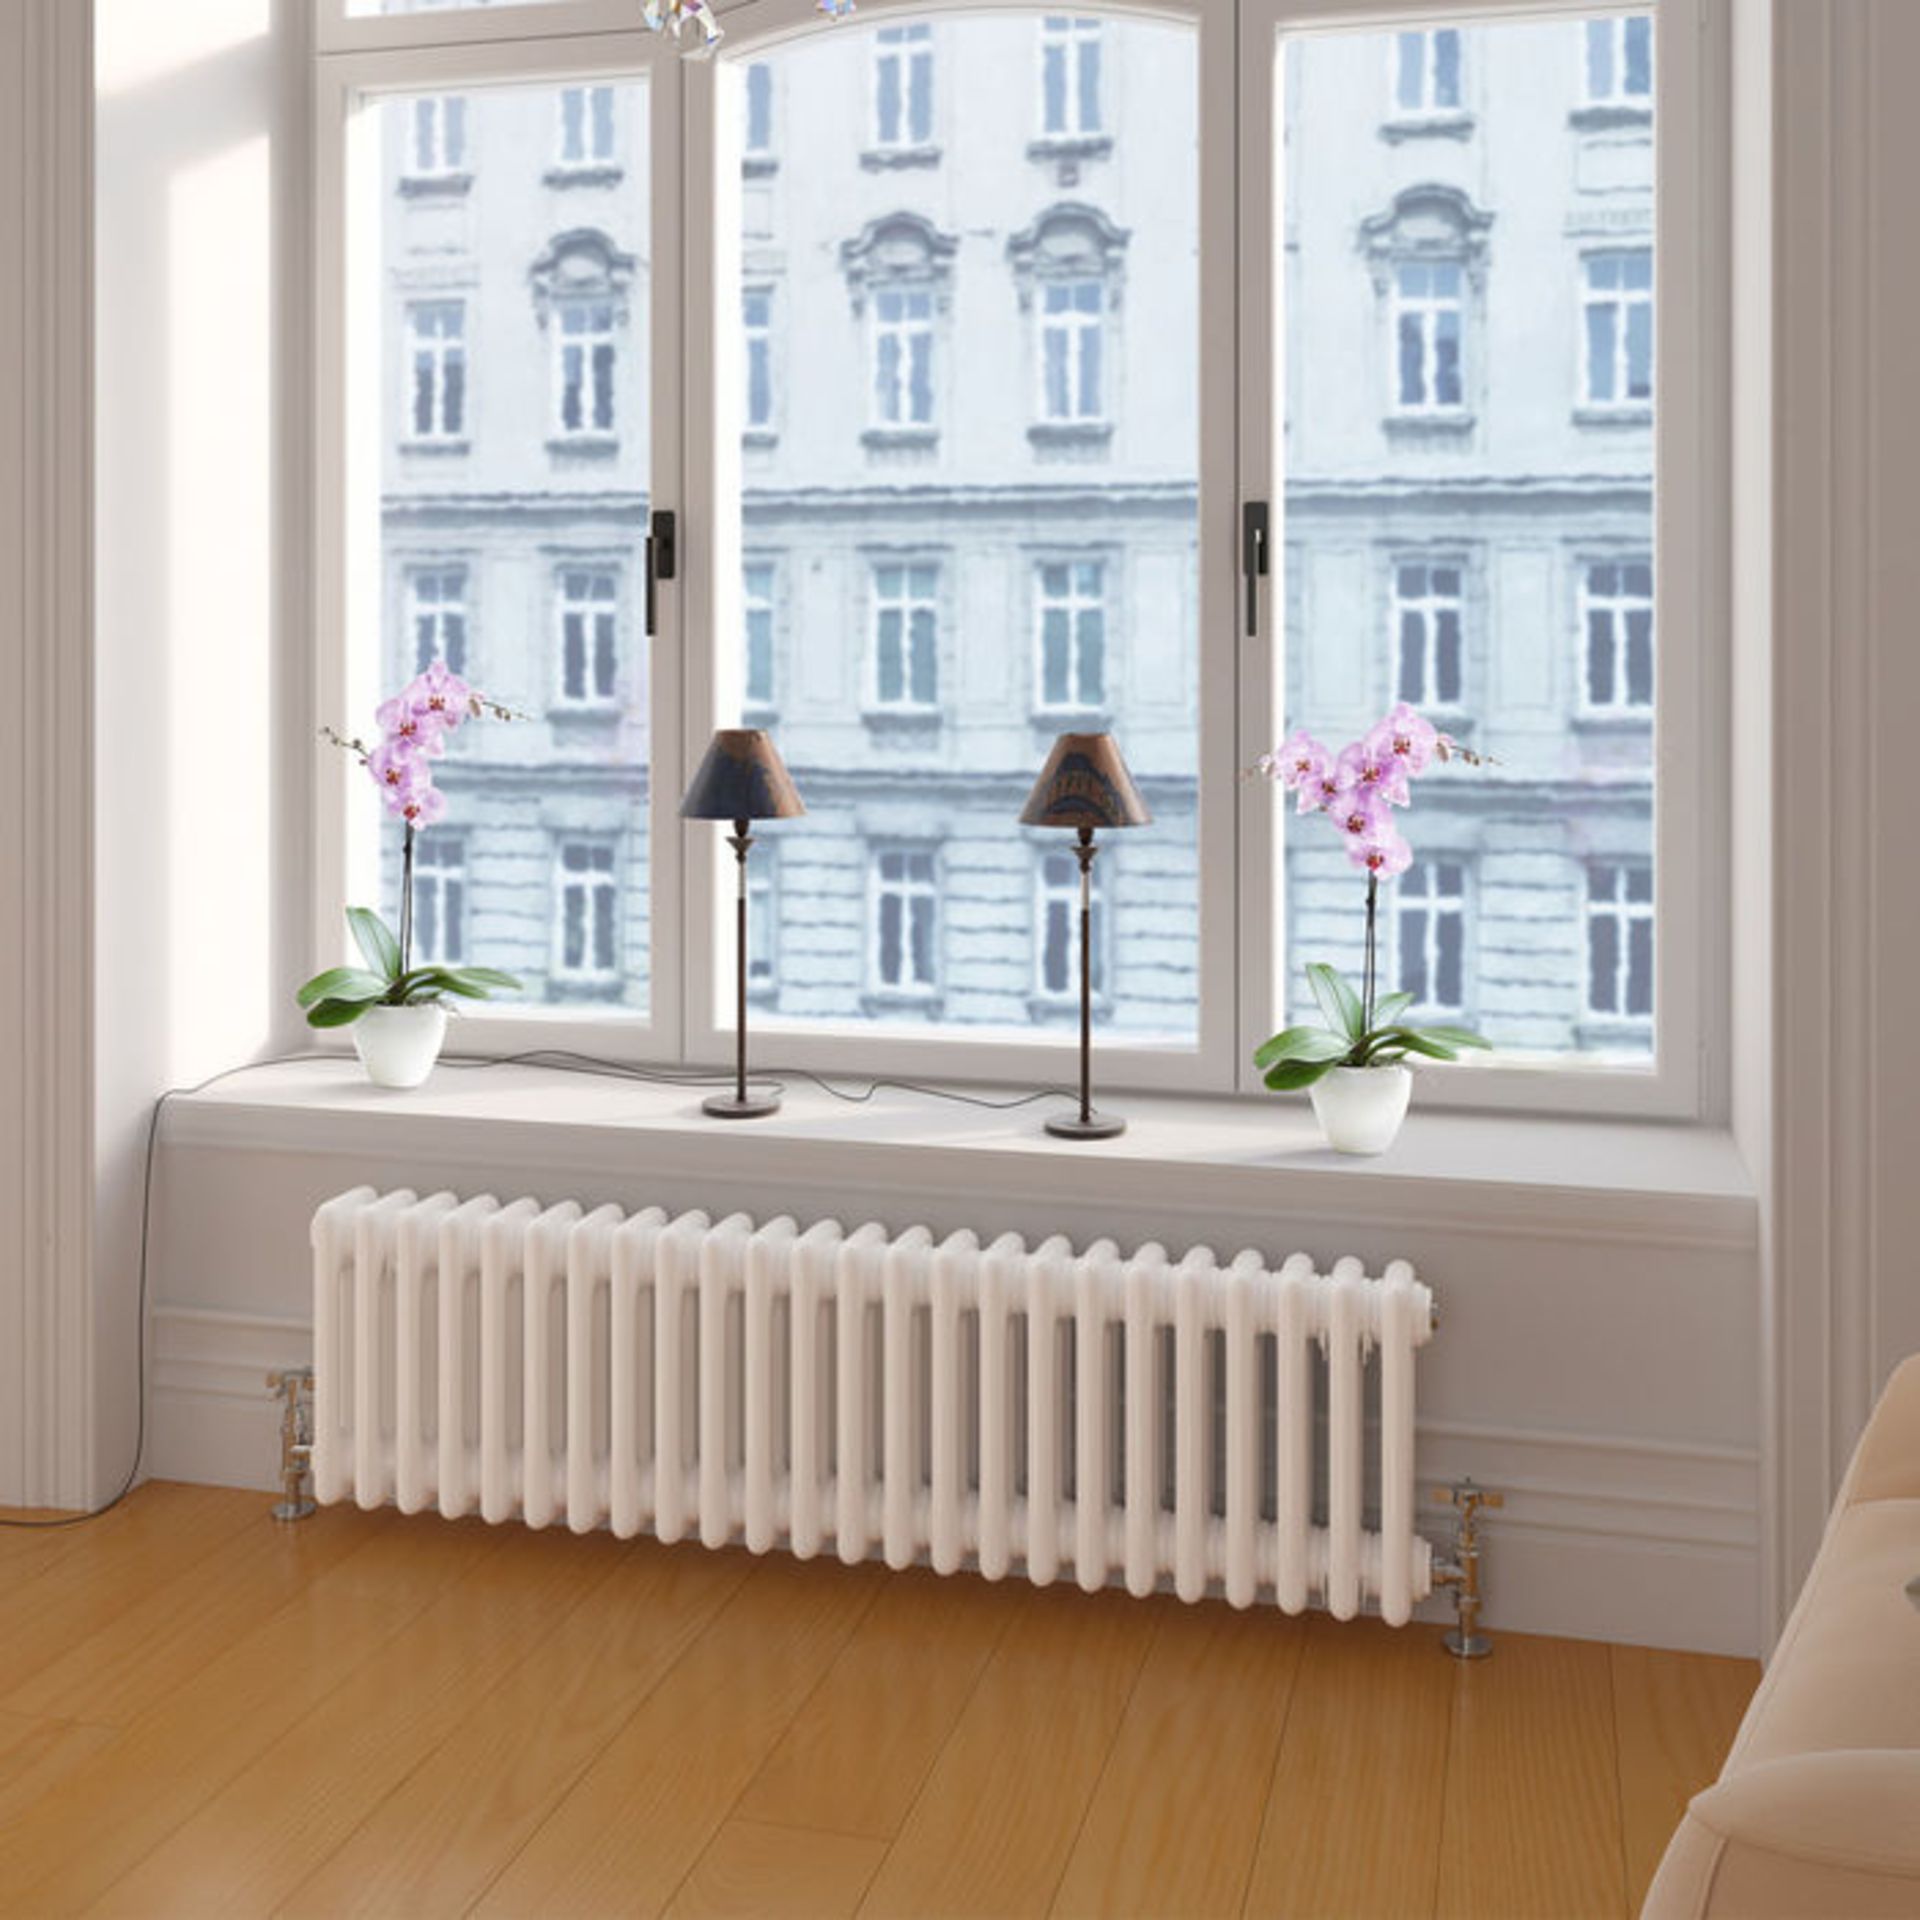 NEW (D204) 300x812mm White Four Panel Horizontal Colosseum Traditional Radiator. RRP £443.99. ...